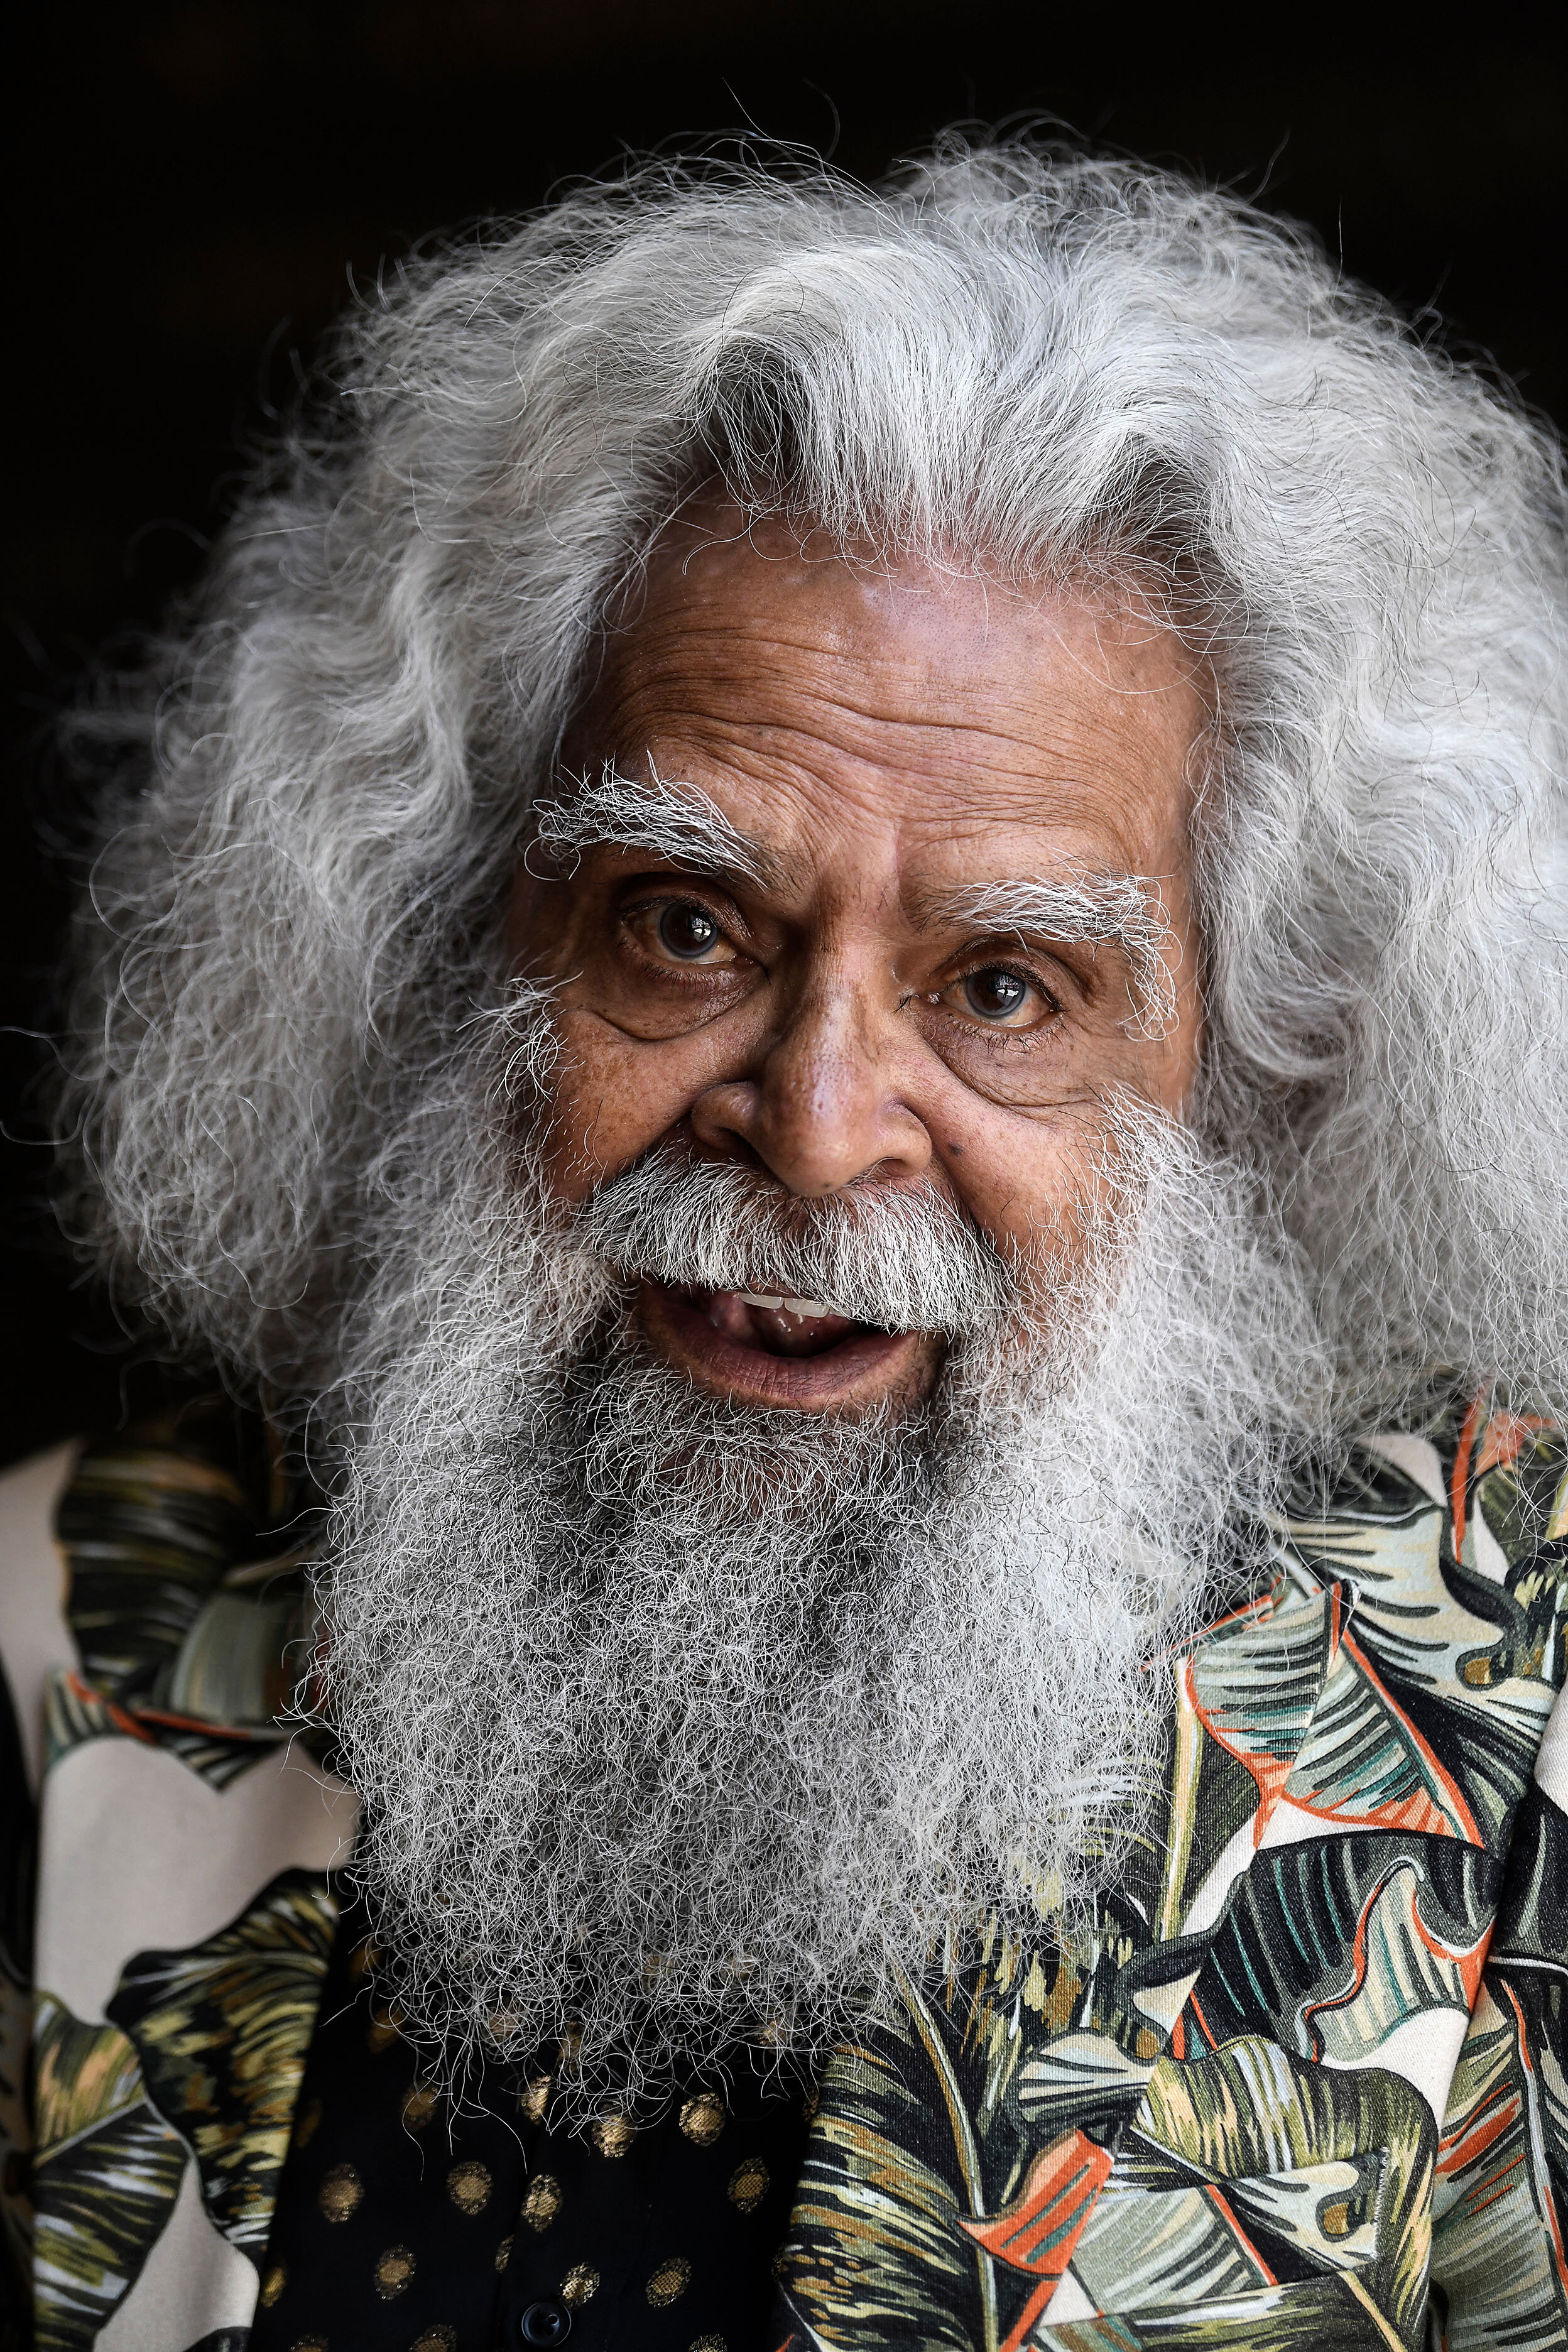  Actor Uncle Jack Charles poses for a photograph during a media call for 'Black Ties' at Sydney Town Hall, in Sydney, Friday, January 10, 2020. AAP Image) 